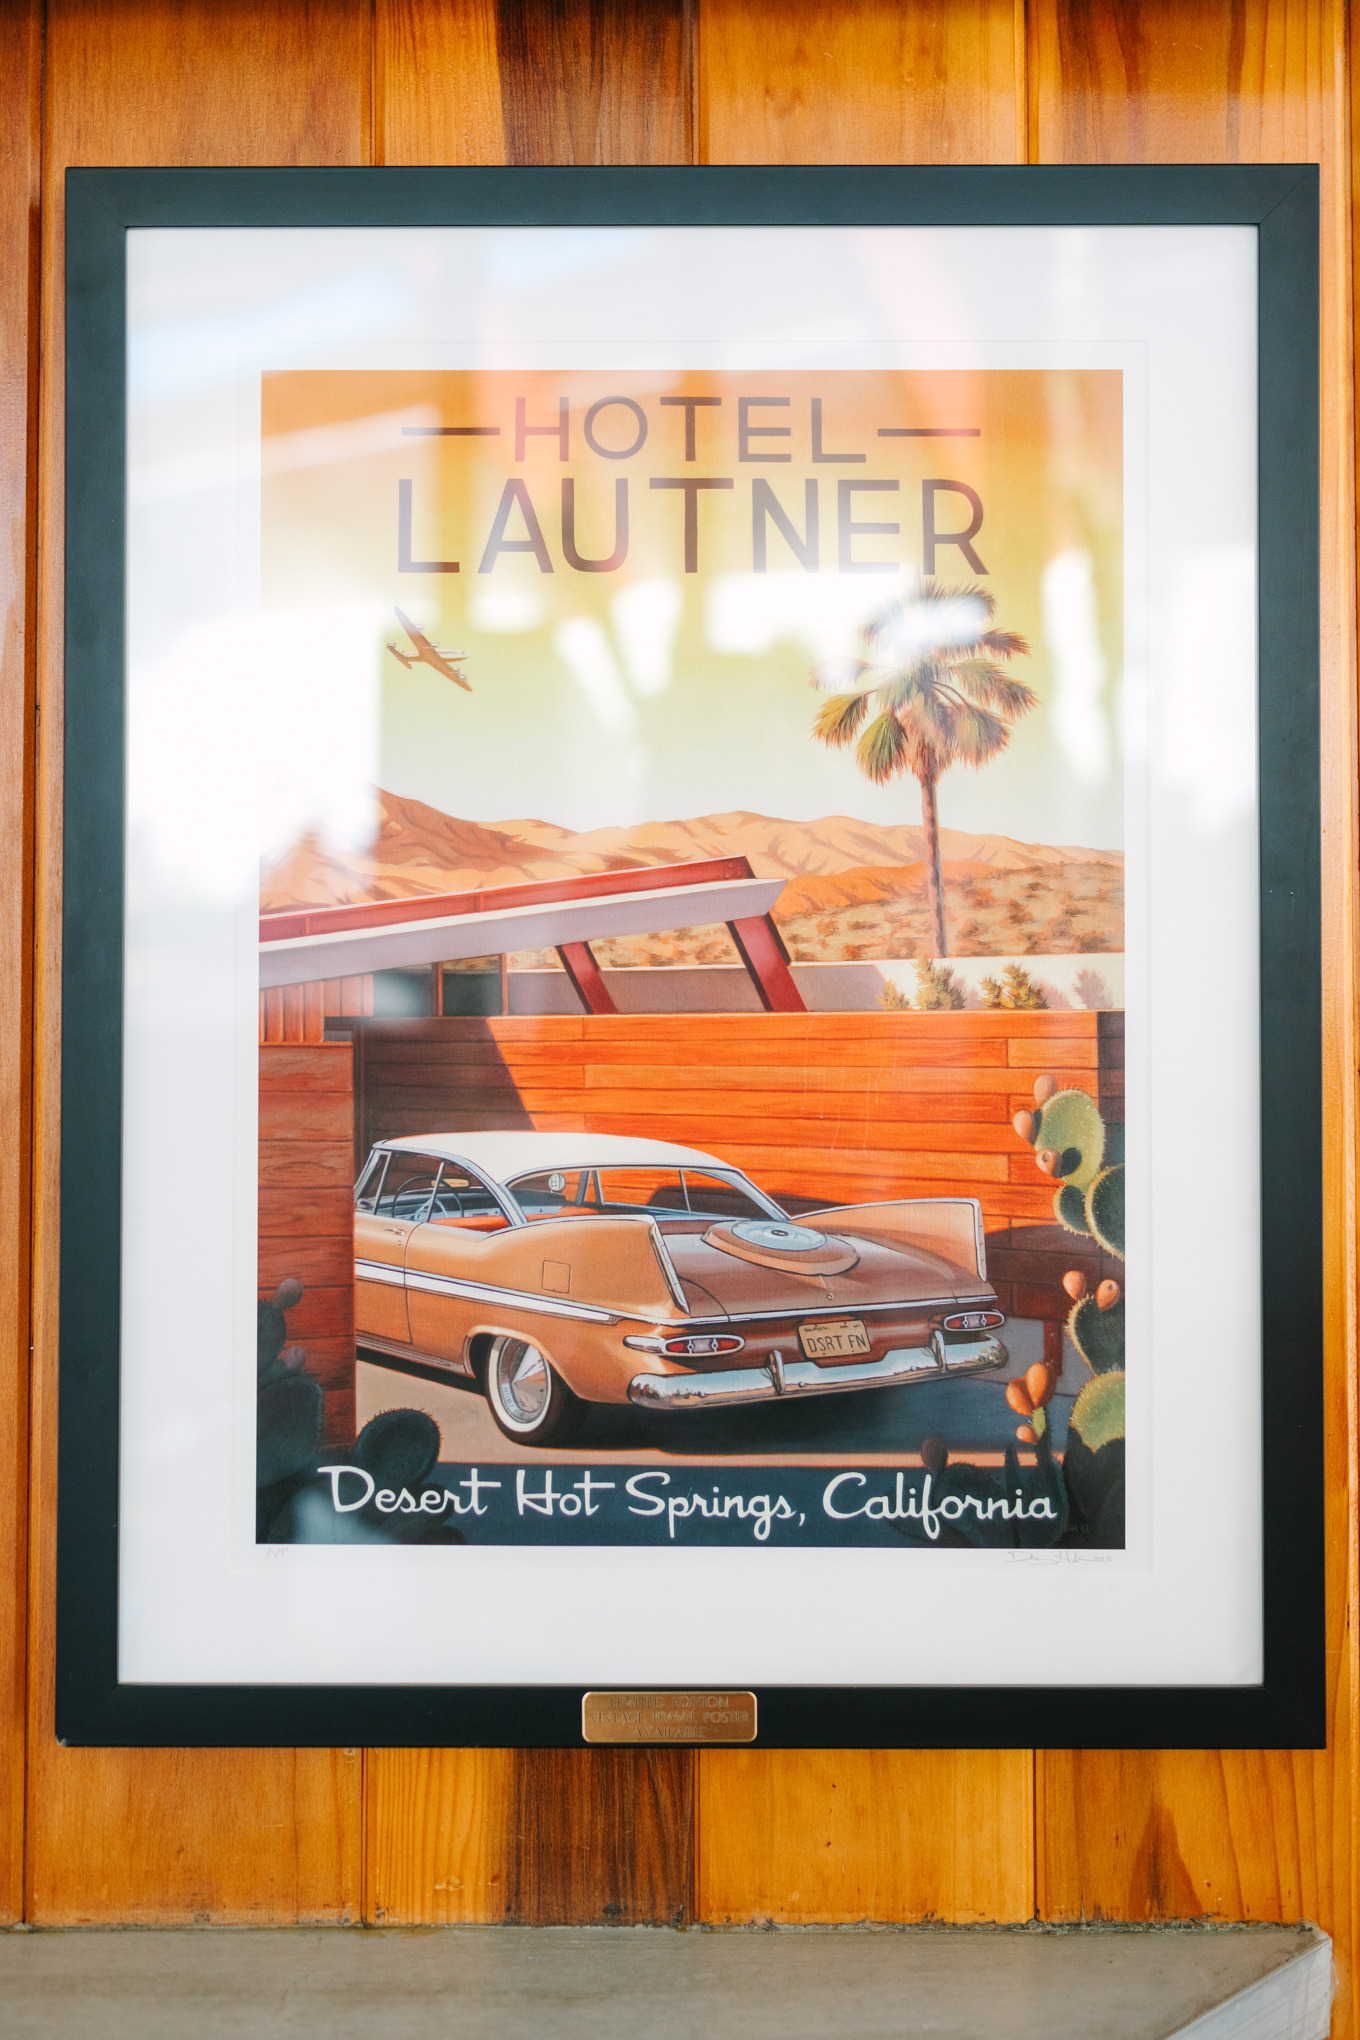 Mid Century Modern poster | Pink and orange Lautner Compound wedding | Colorful Palm Springs wedding photography | #palmspringsphotographer #palmspringswedding #lautnercompound #southerncaliforniawedding  Source: Mary Costa Photography | Los Angeles